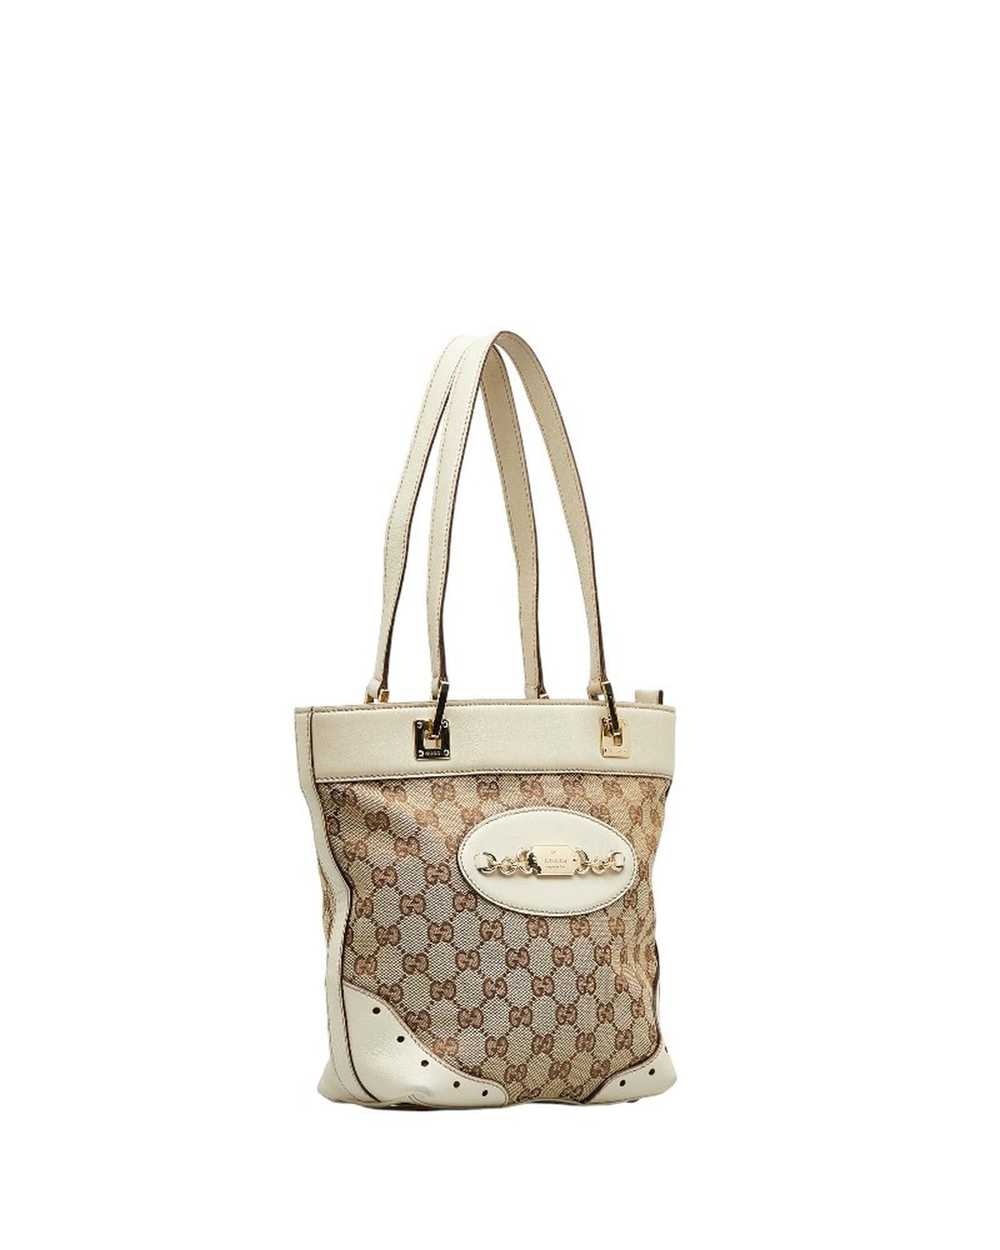 Gucci Canvas Tote Bag in Brown with Signature GG … - image 2